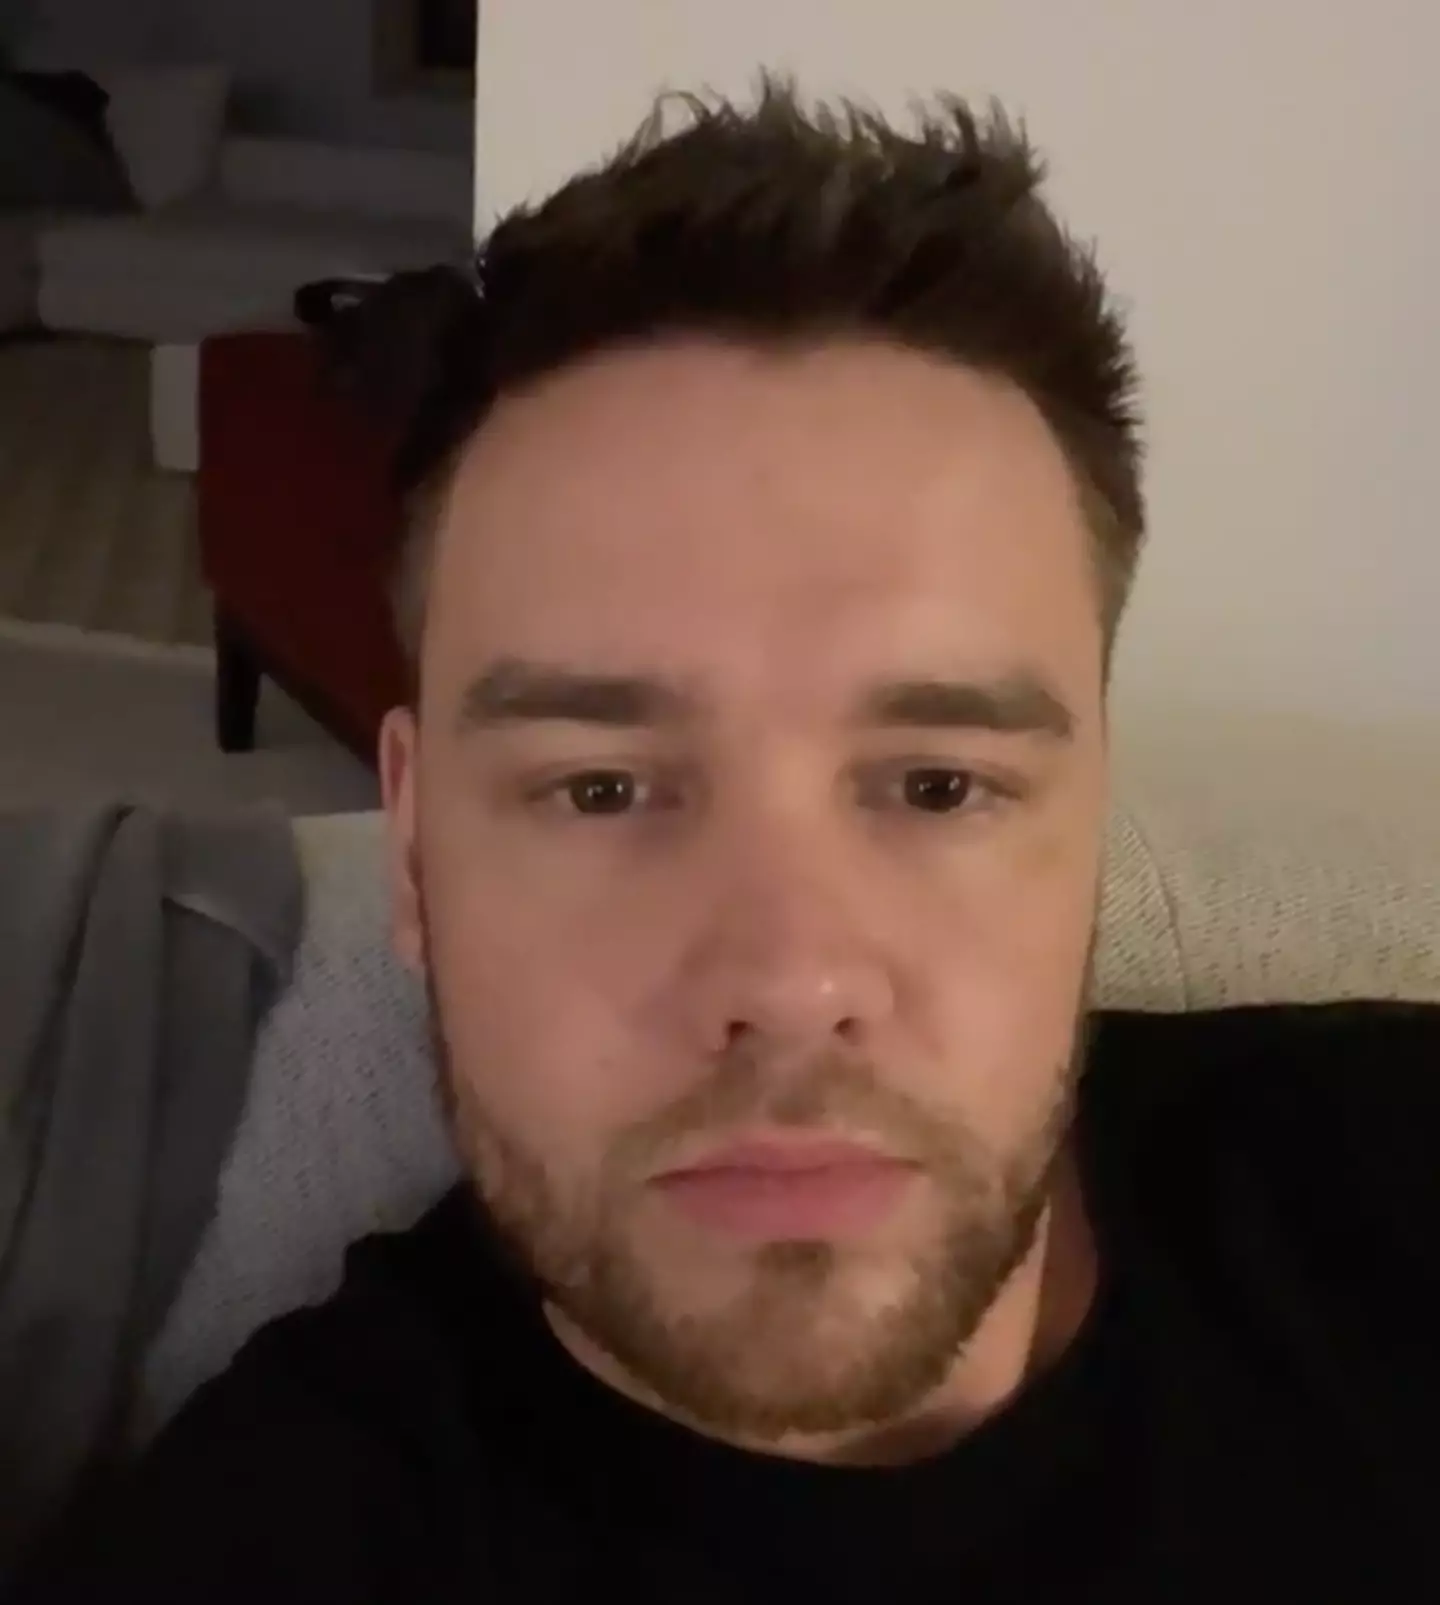 Liam Payne assured he's being well cared for.